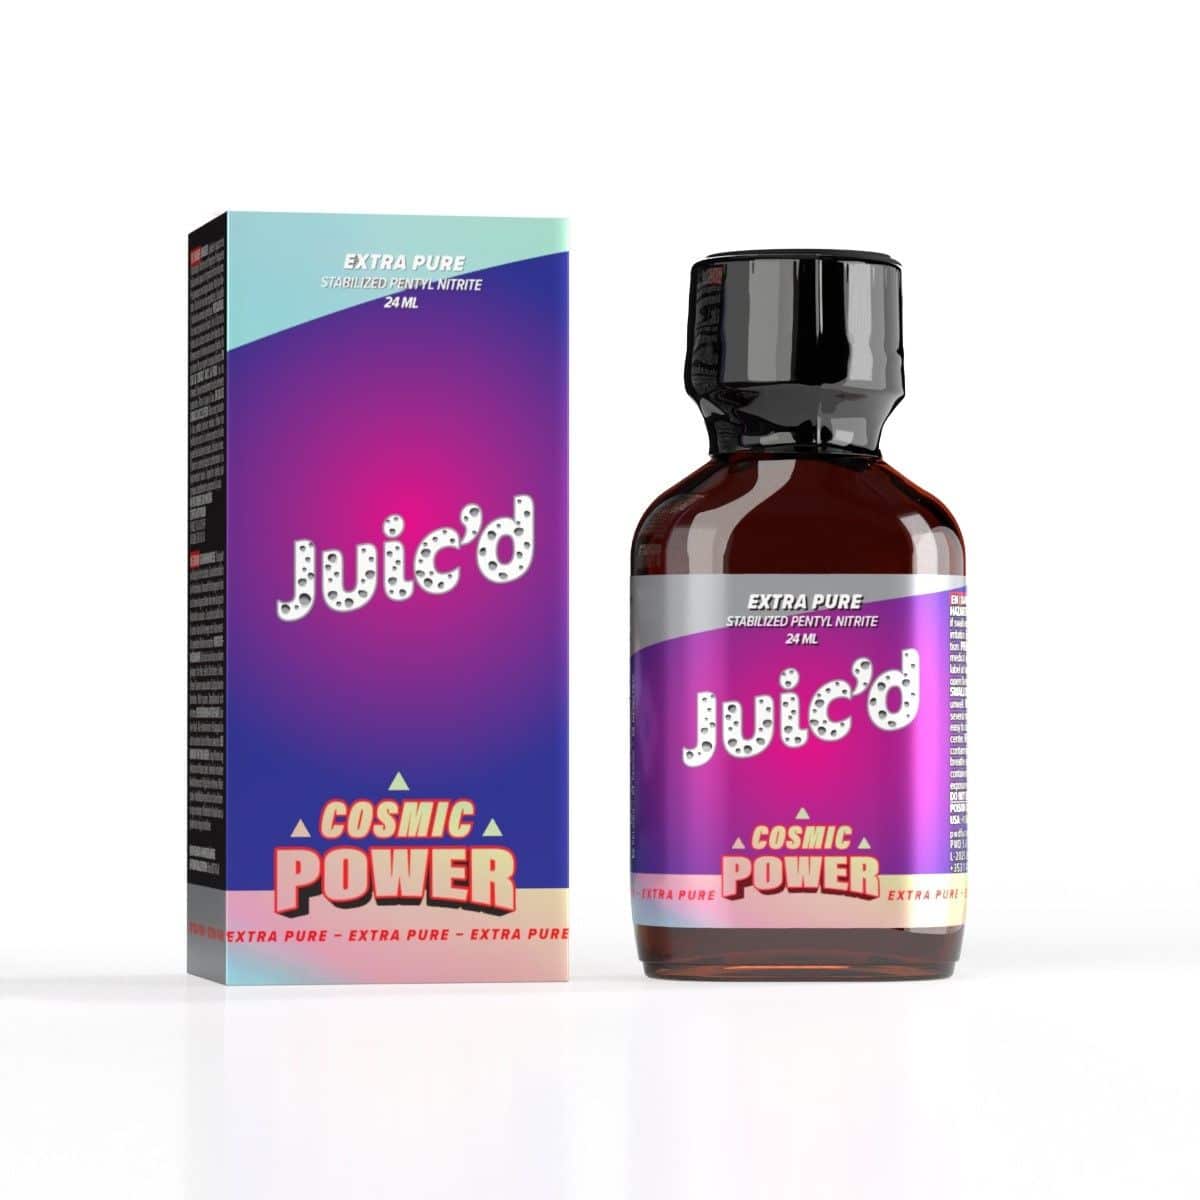 A sleek bottle of Juic'd Cosmic Power Pentyl with bold purple branding accompanies its vibrant packaging box, emphasizing its 'cosmic power' and boasting extra purity for an energetic appeal.